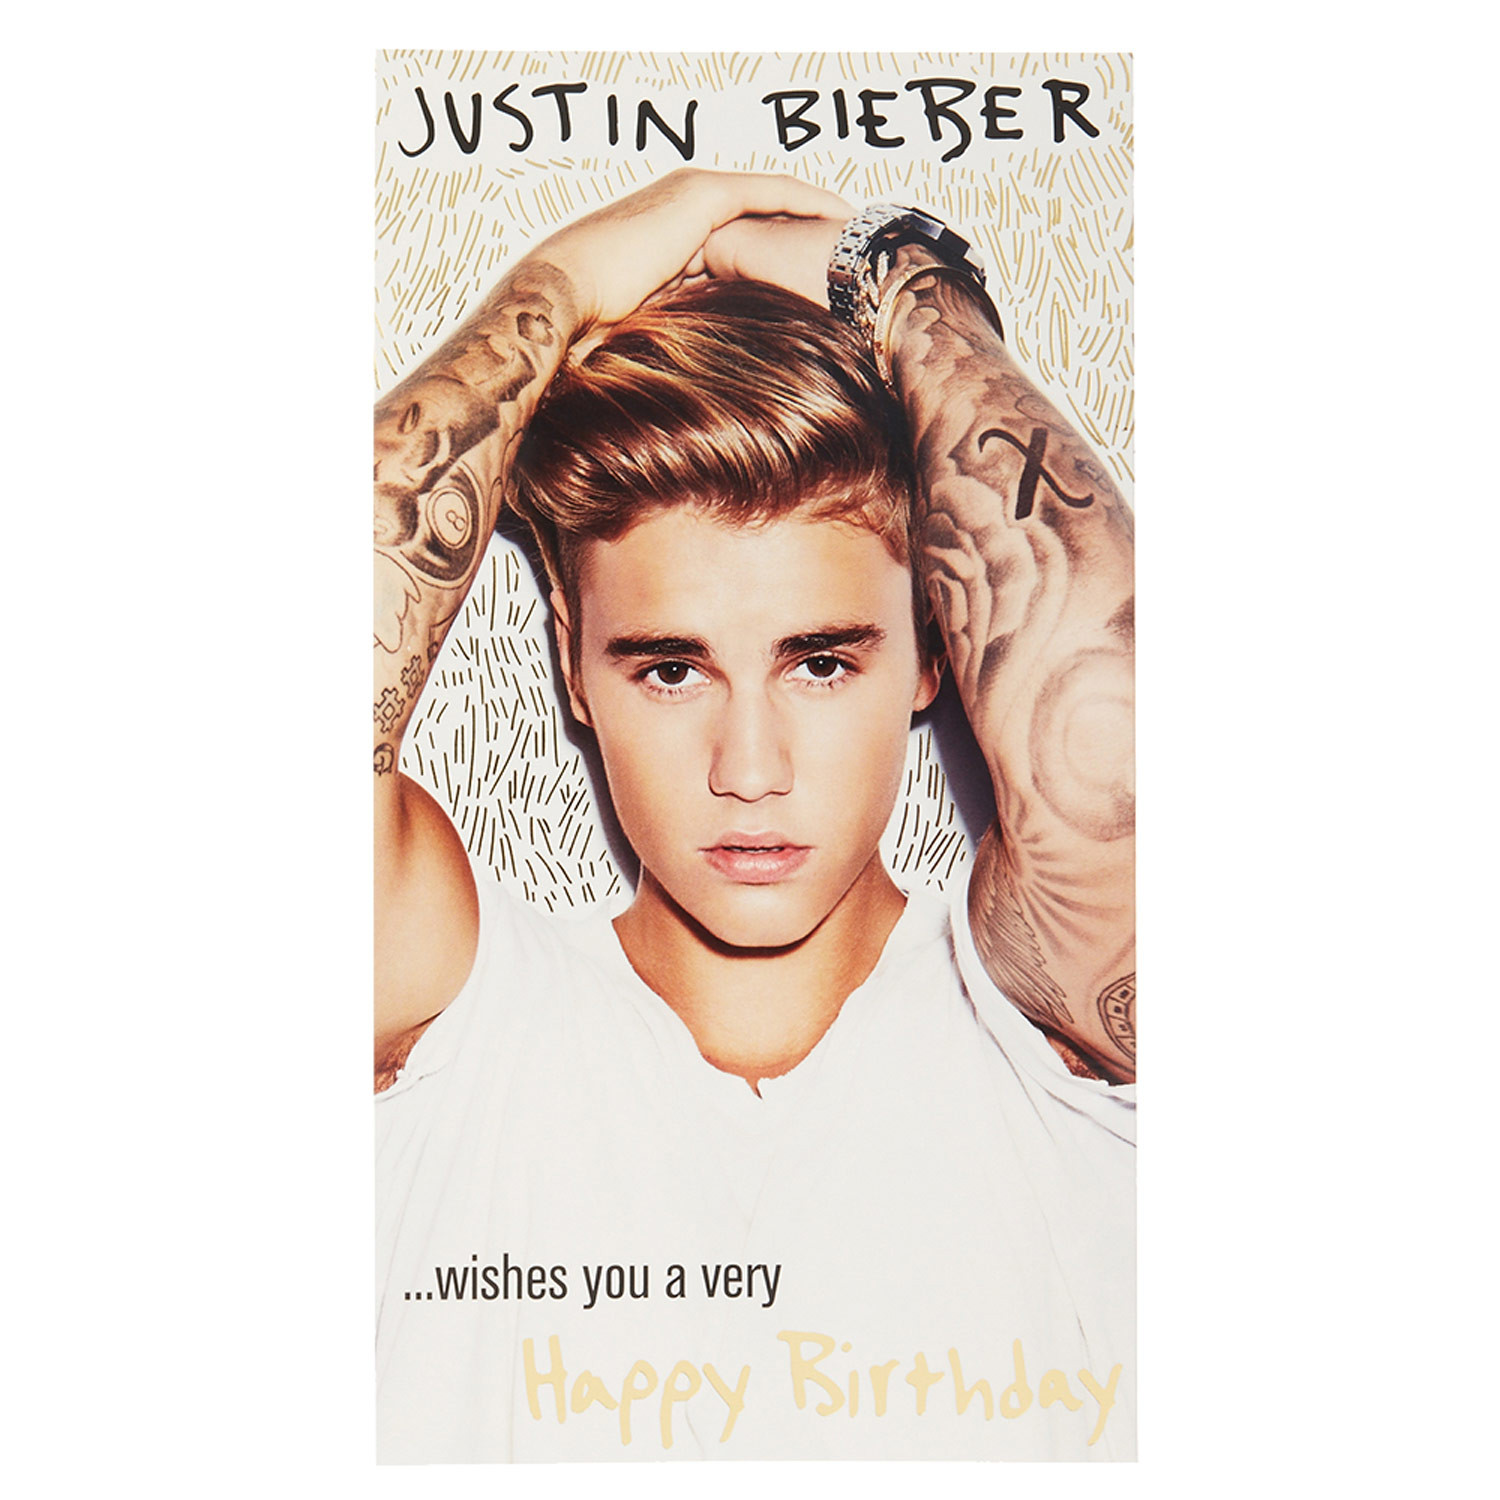 Justin Bieber Birthday Card
 Image Claire s Justin Bieber Fold Out Birthday Card